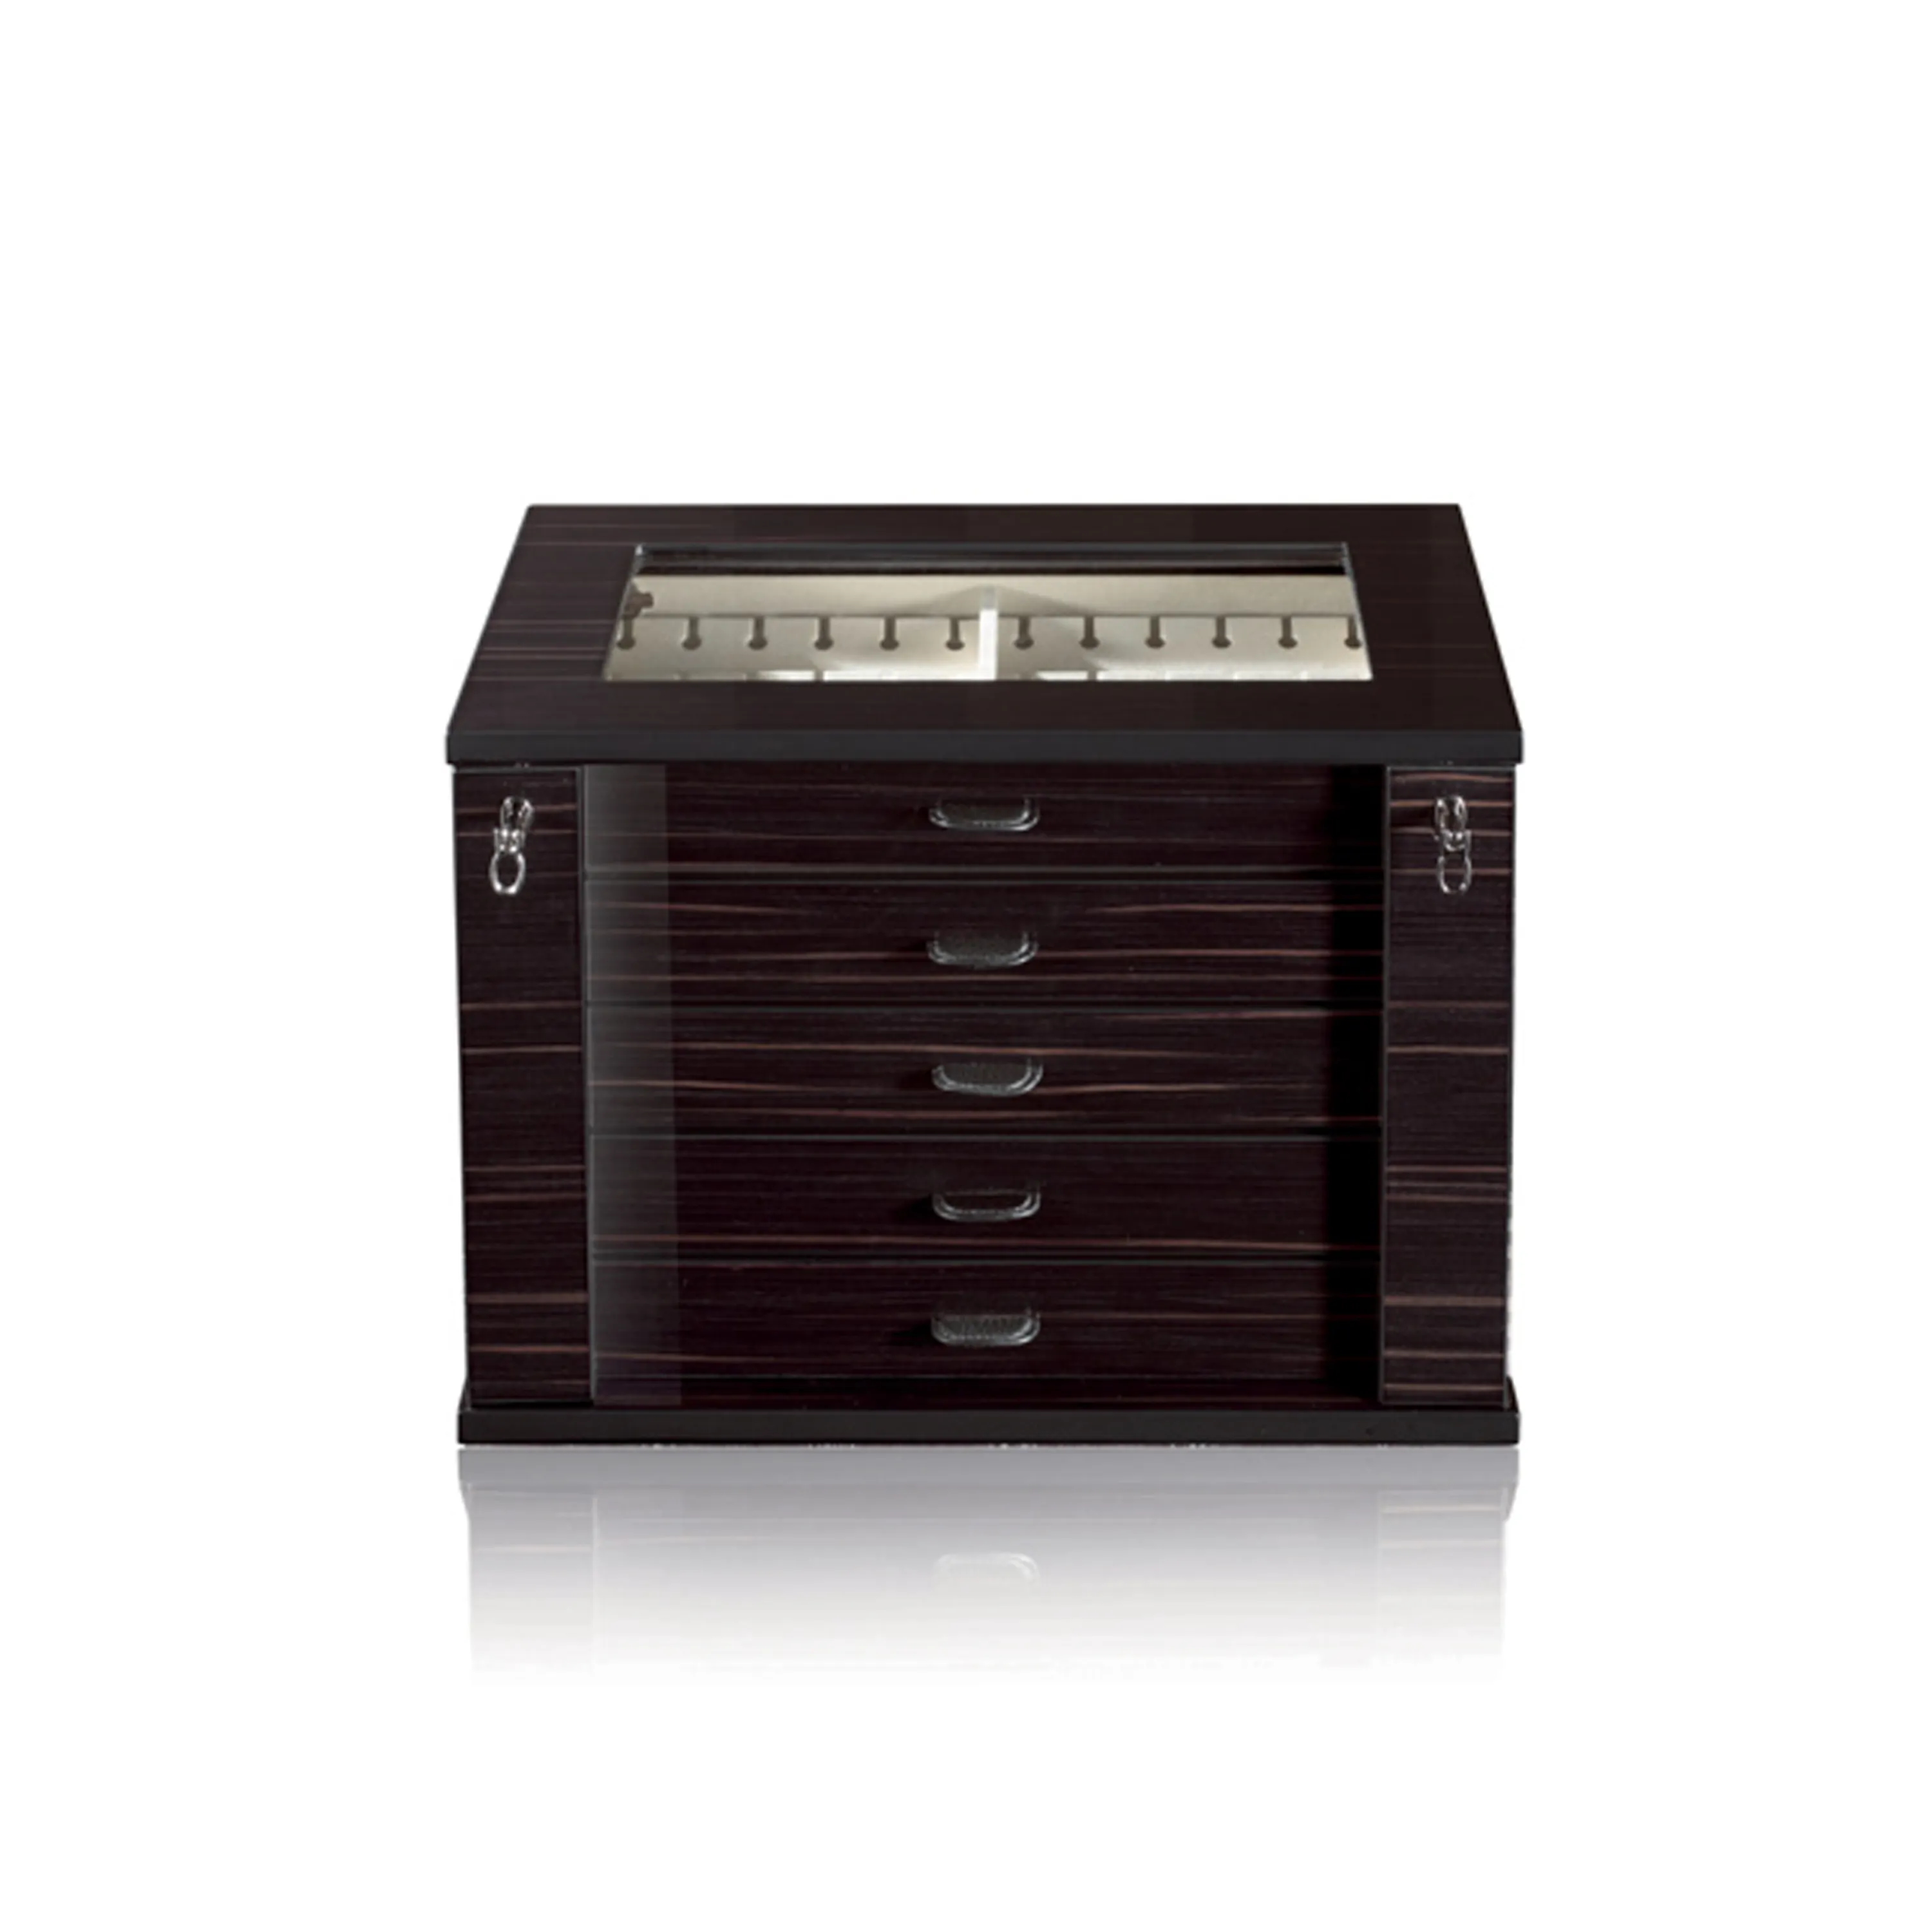 Chest in polished ebony, lockable, for 54 pairs of cufflinks, extendable to 90 pairs. Cufflinks